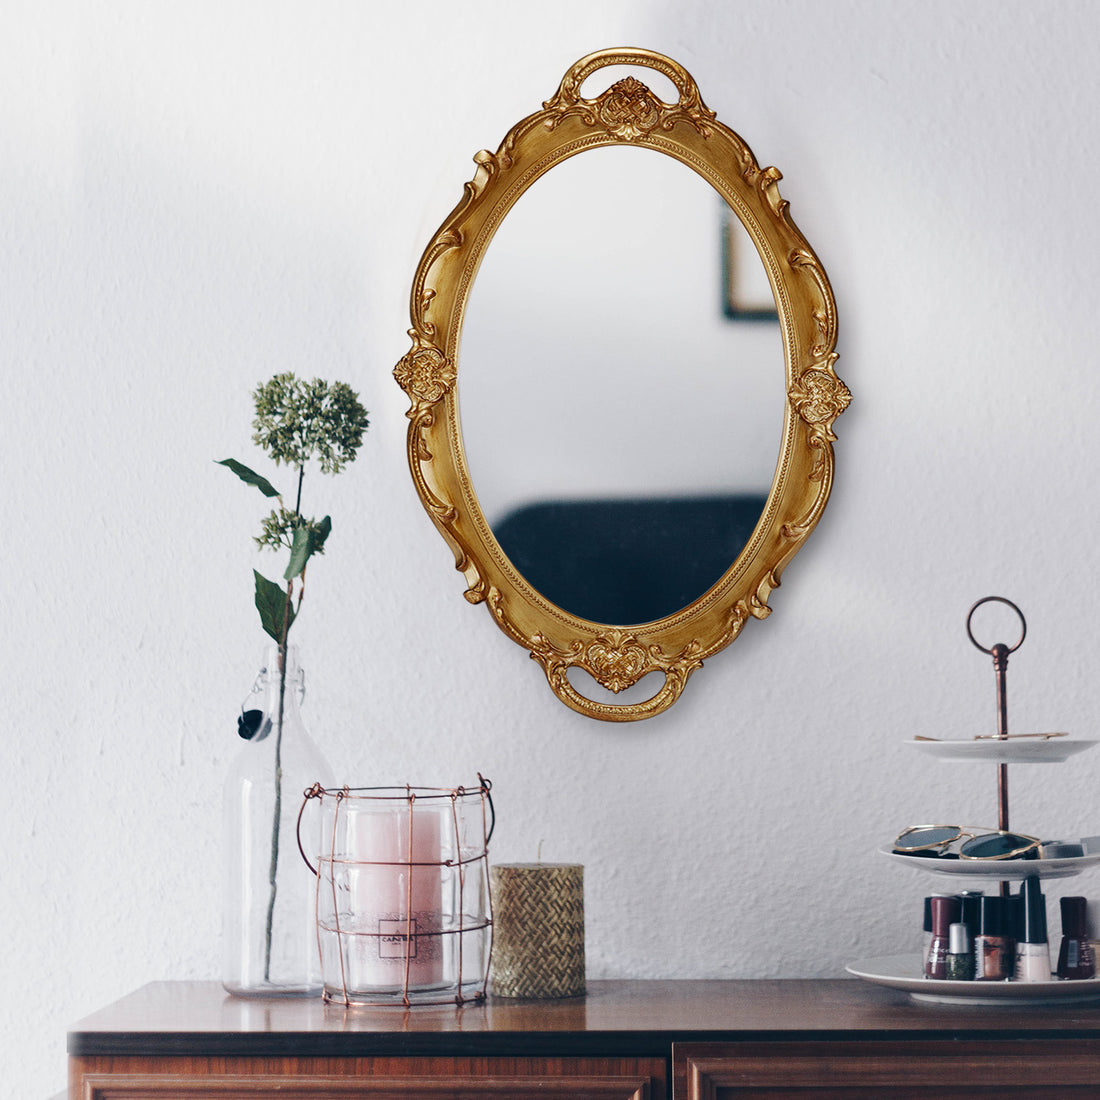 Decorating Your Home With Antique Mirrors